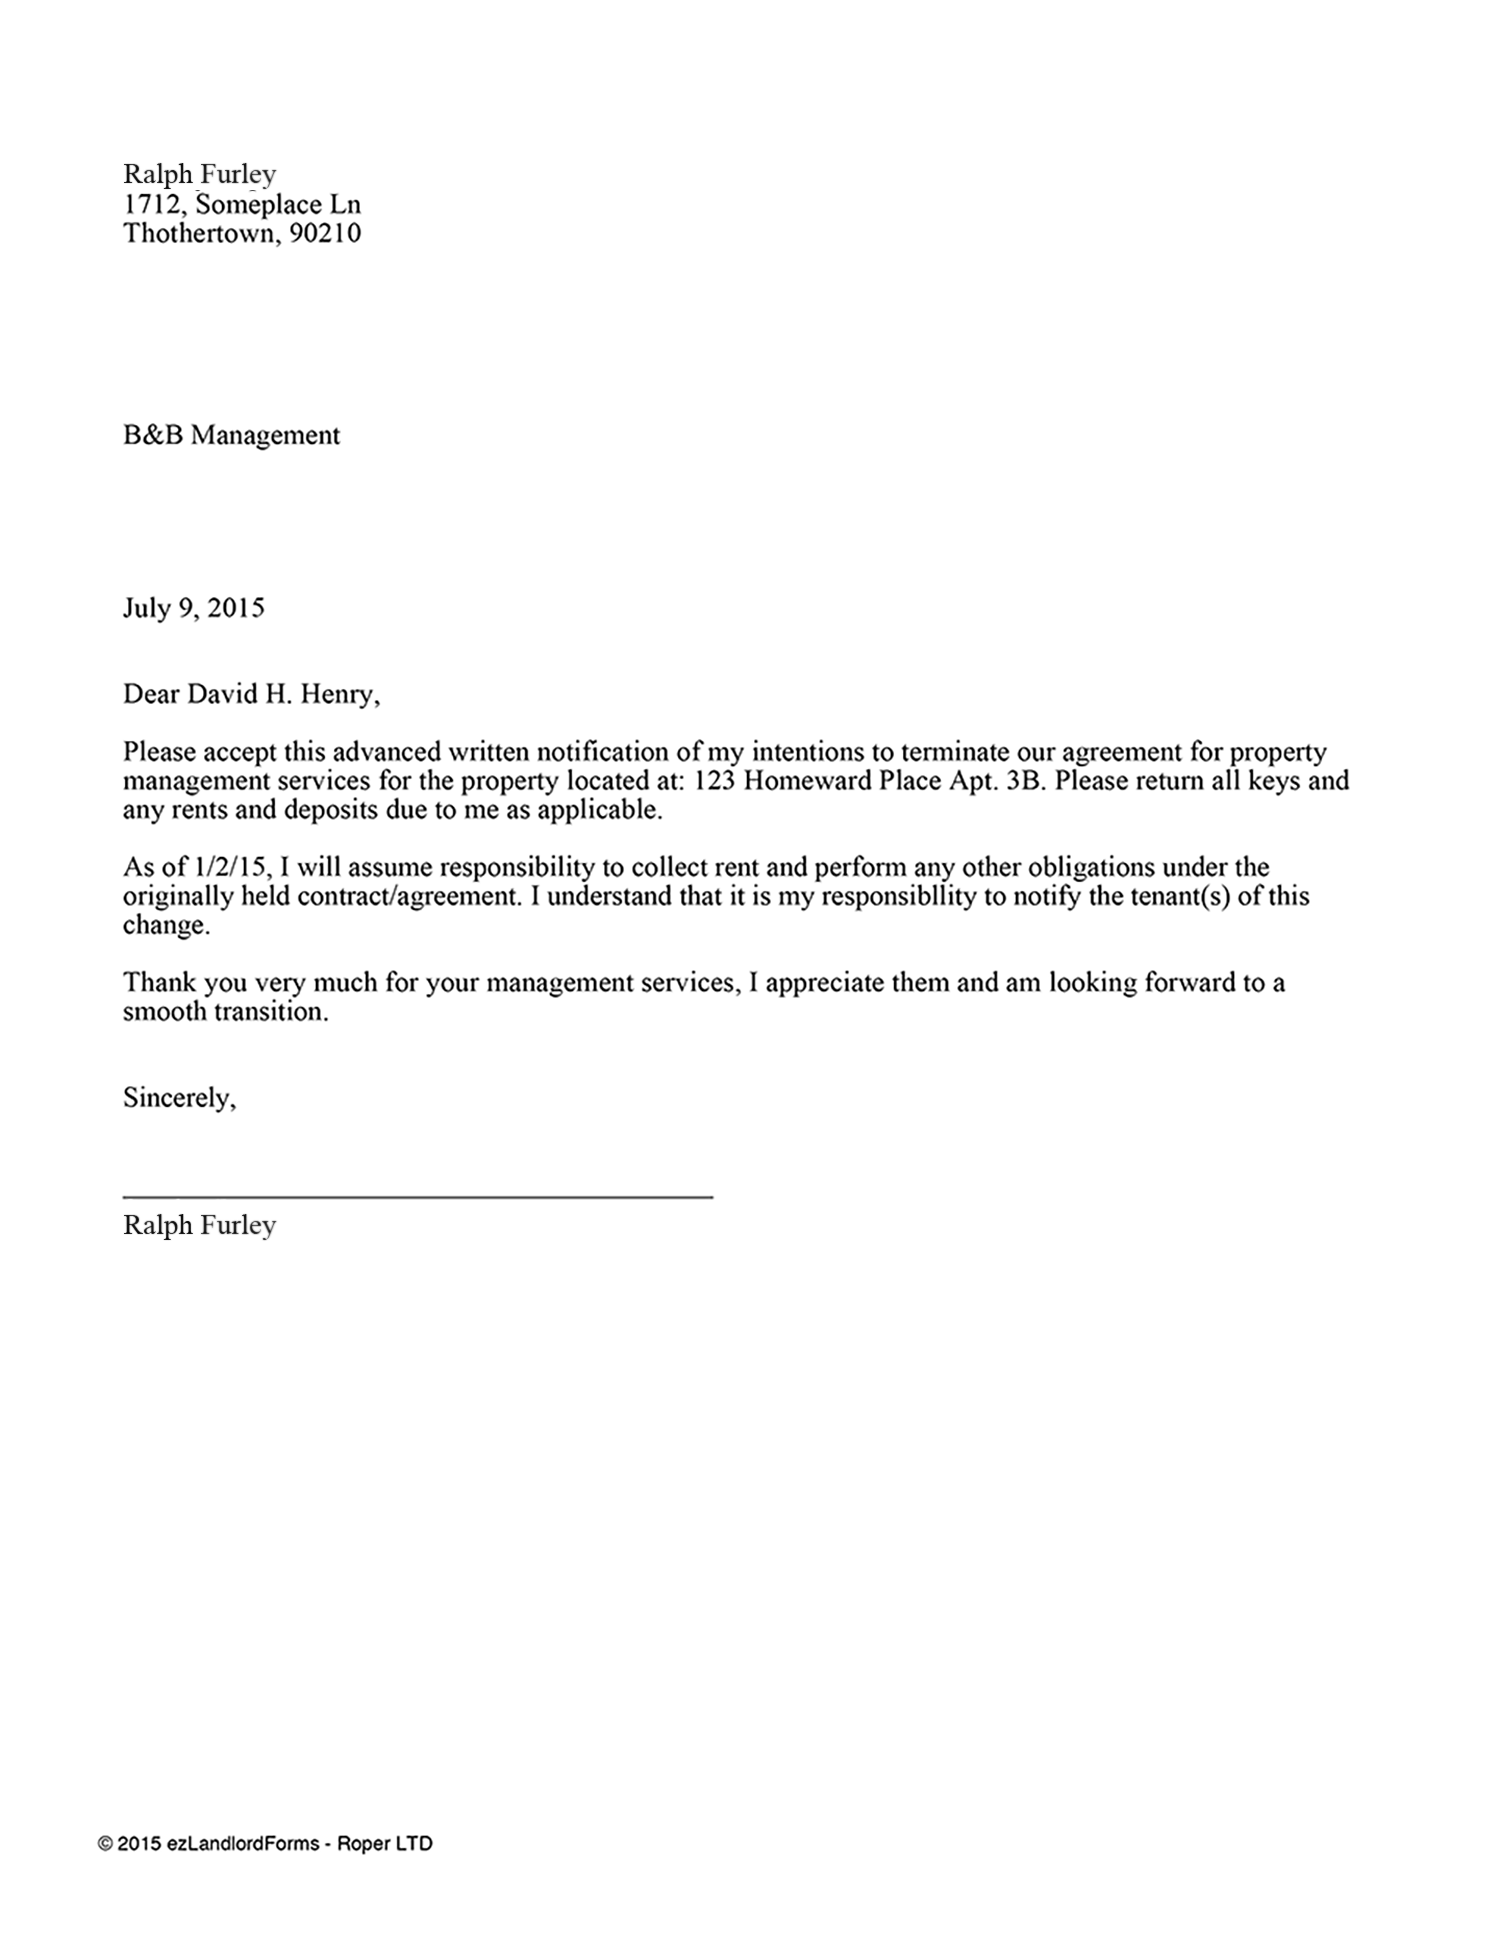 Contract Termination Letter from www.ezlandlordforms.com